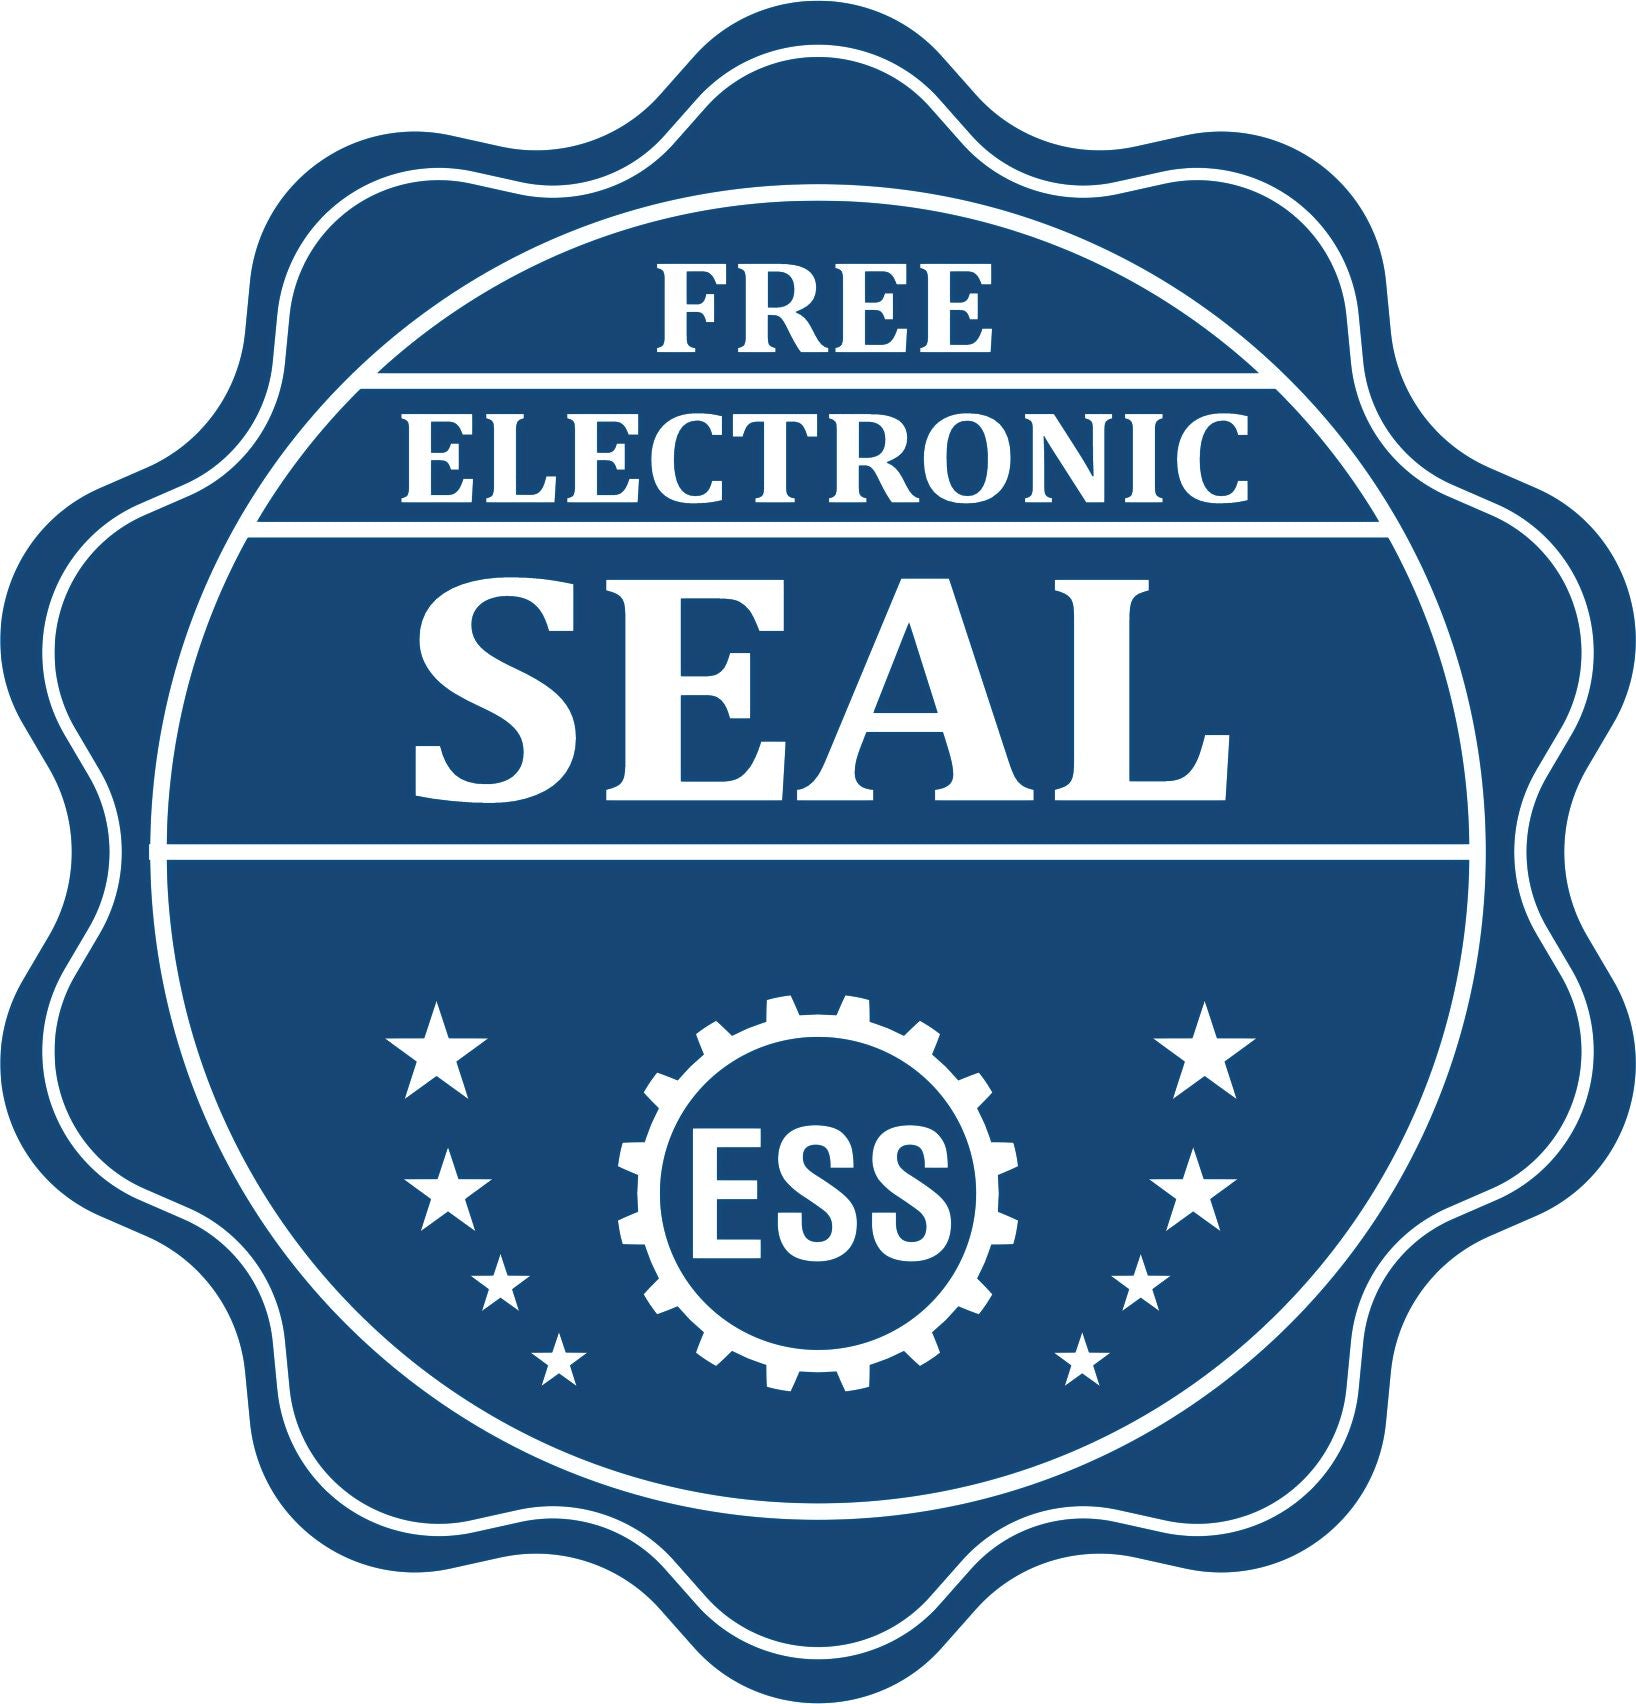 A badge showing a free electronic seal for the Colorado Desk Surveyor Seal Embosser with stars and the ESS gear on the emblem.